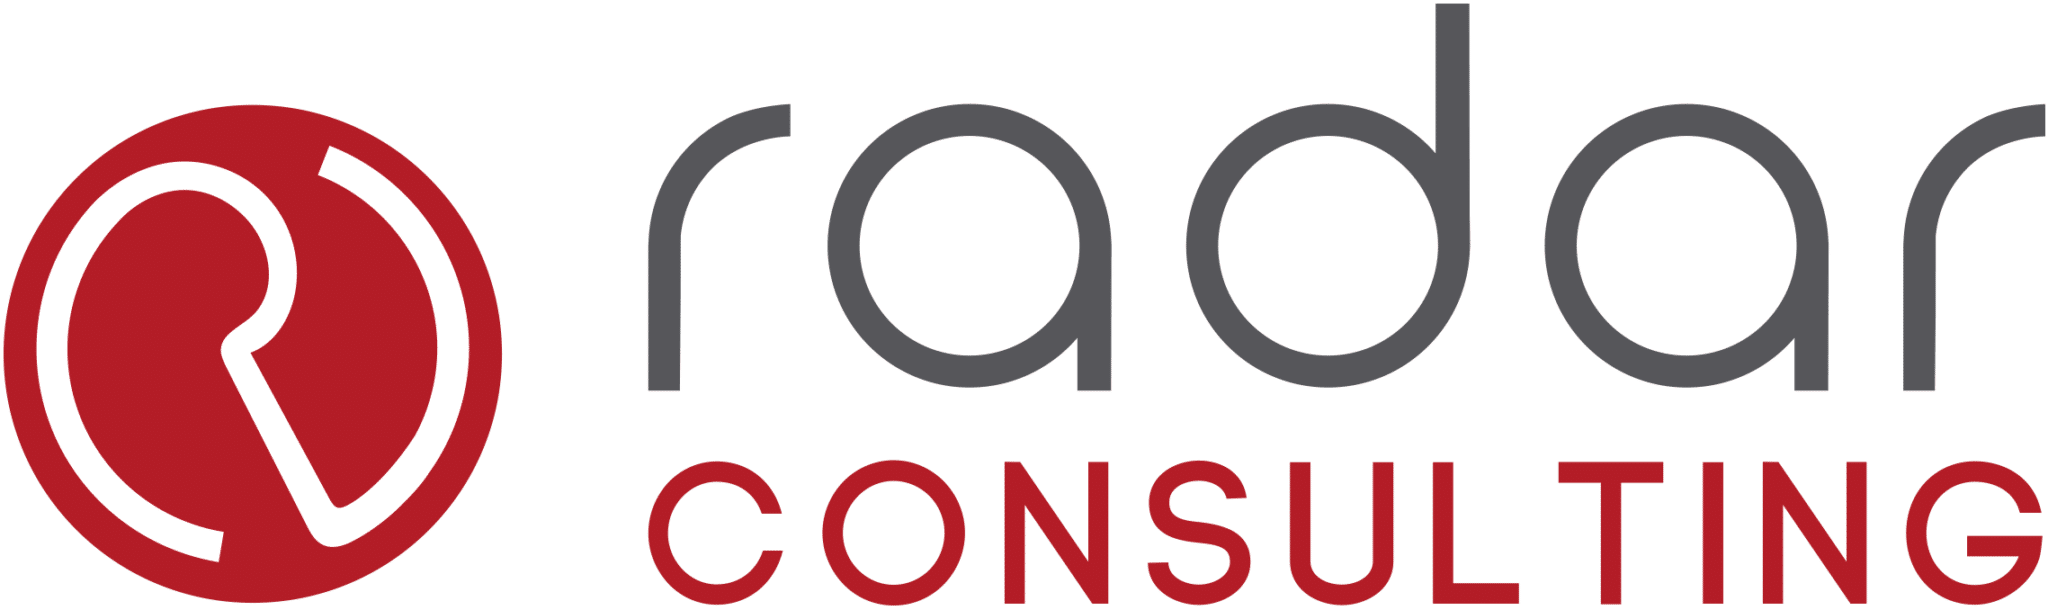 logo consulting orizzontale